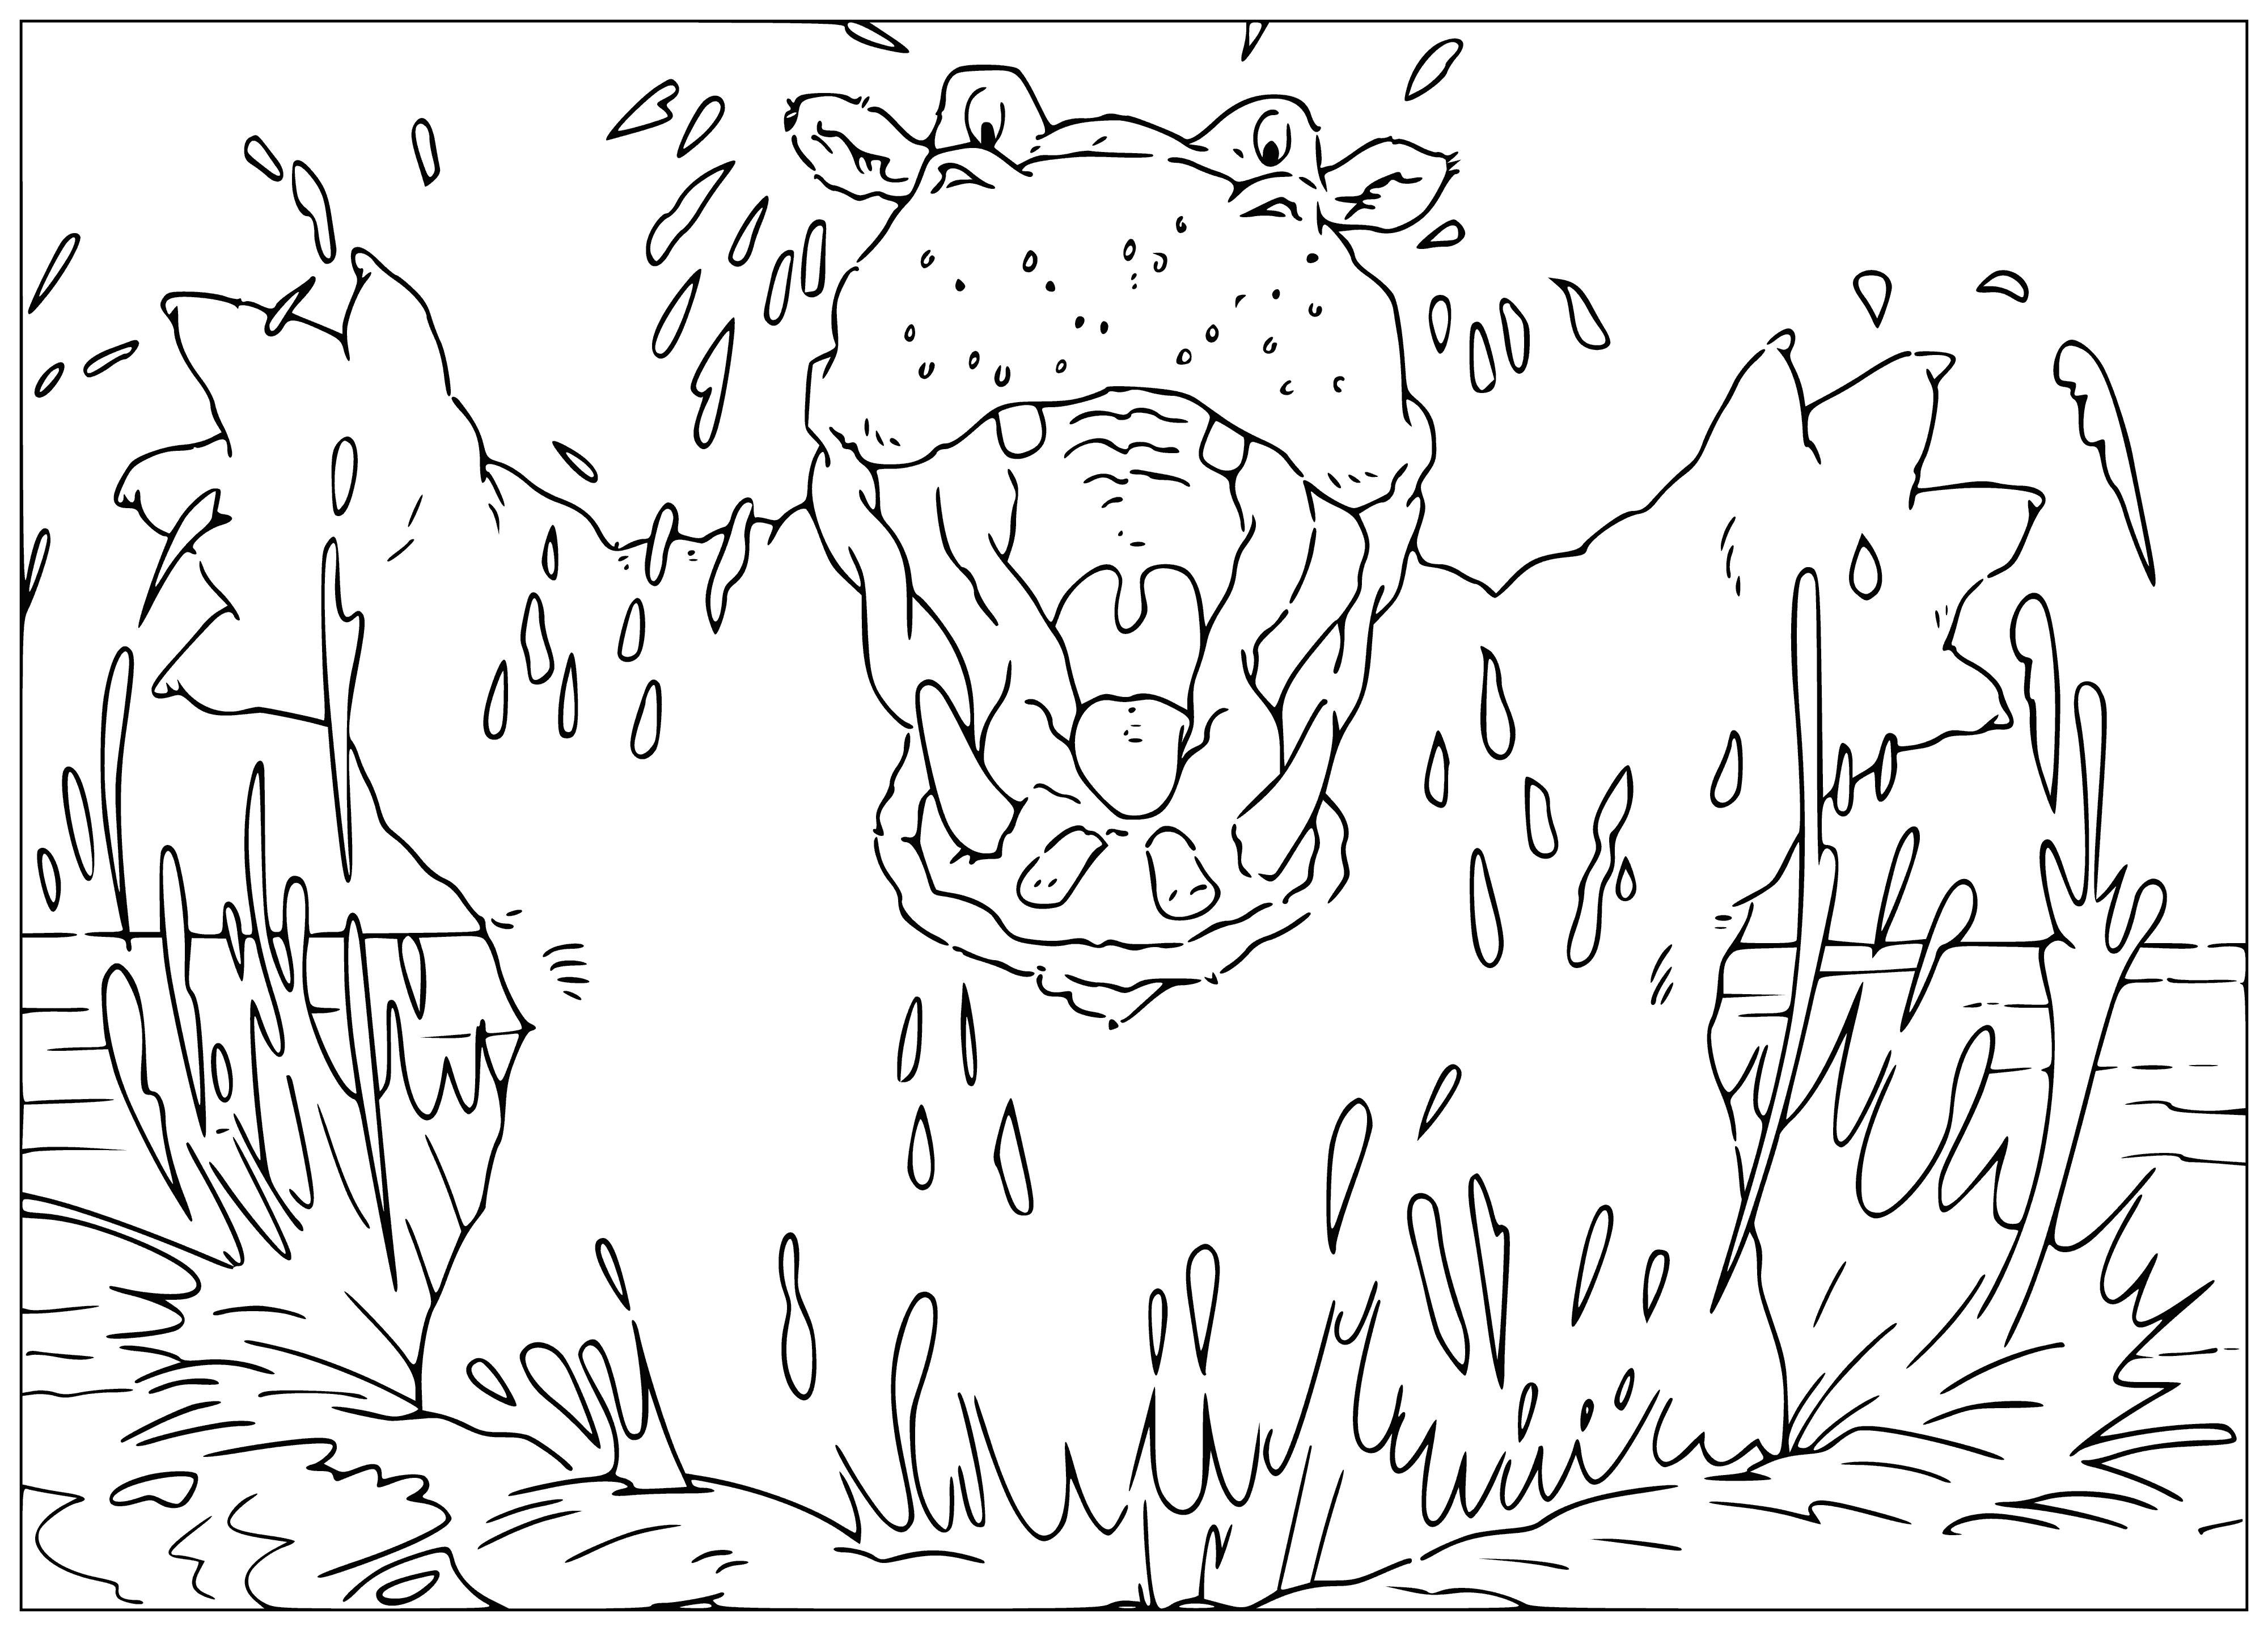 Scary hippo coloring page